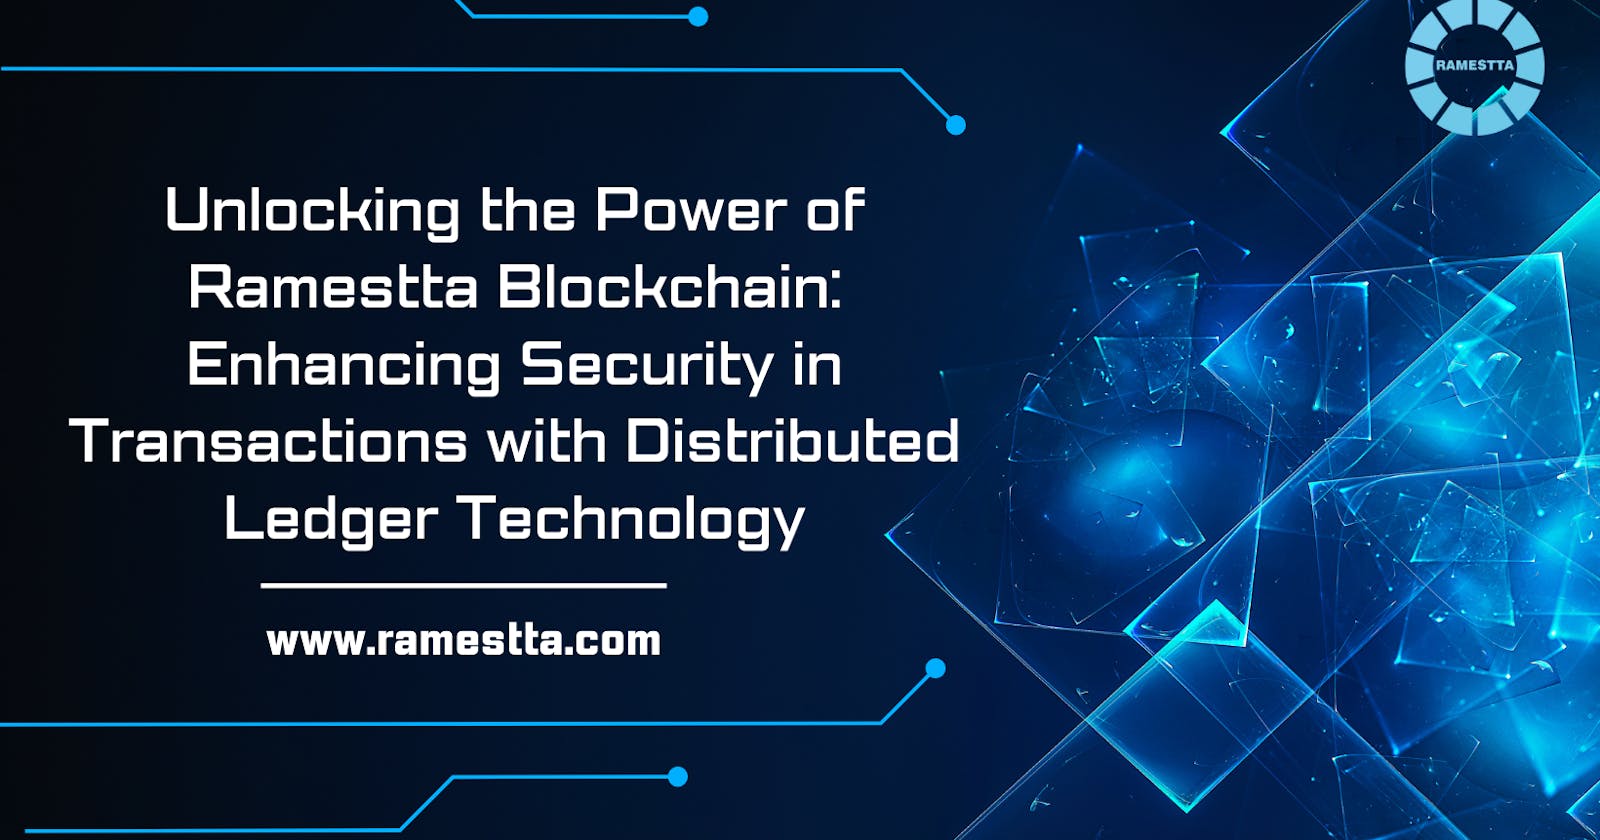 Unlocking the Power of Ramestta Blockchain: Enhancing Security in Transactions with Distributed Ledger Technology